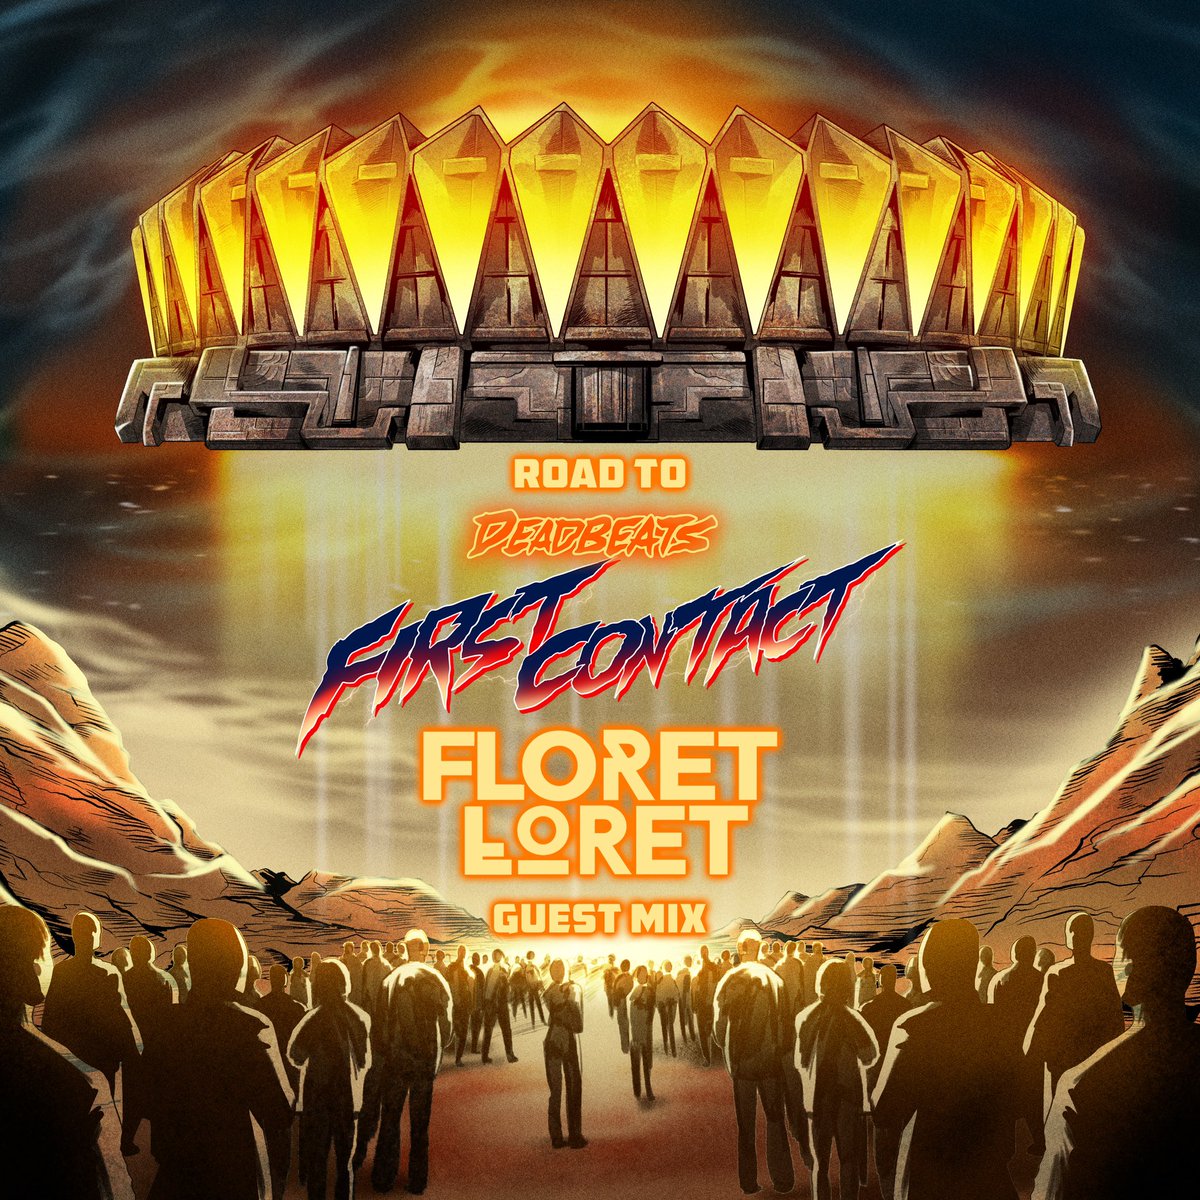 THE ROAD TO FIRST CONTACT! In just 10 DAYS, we will touch down at Hampton Coliseum for the very first time. To help make your journey smooth, @Floret_Loret has given us a special mix to get you hyped for the event of a lifetime🛸👽